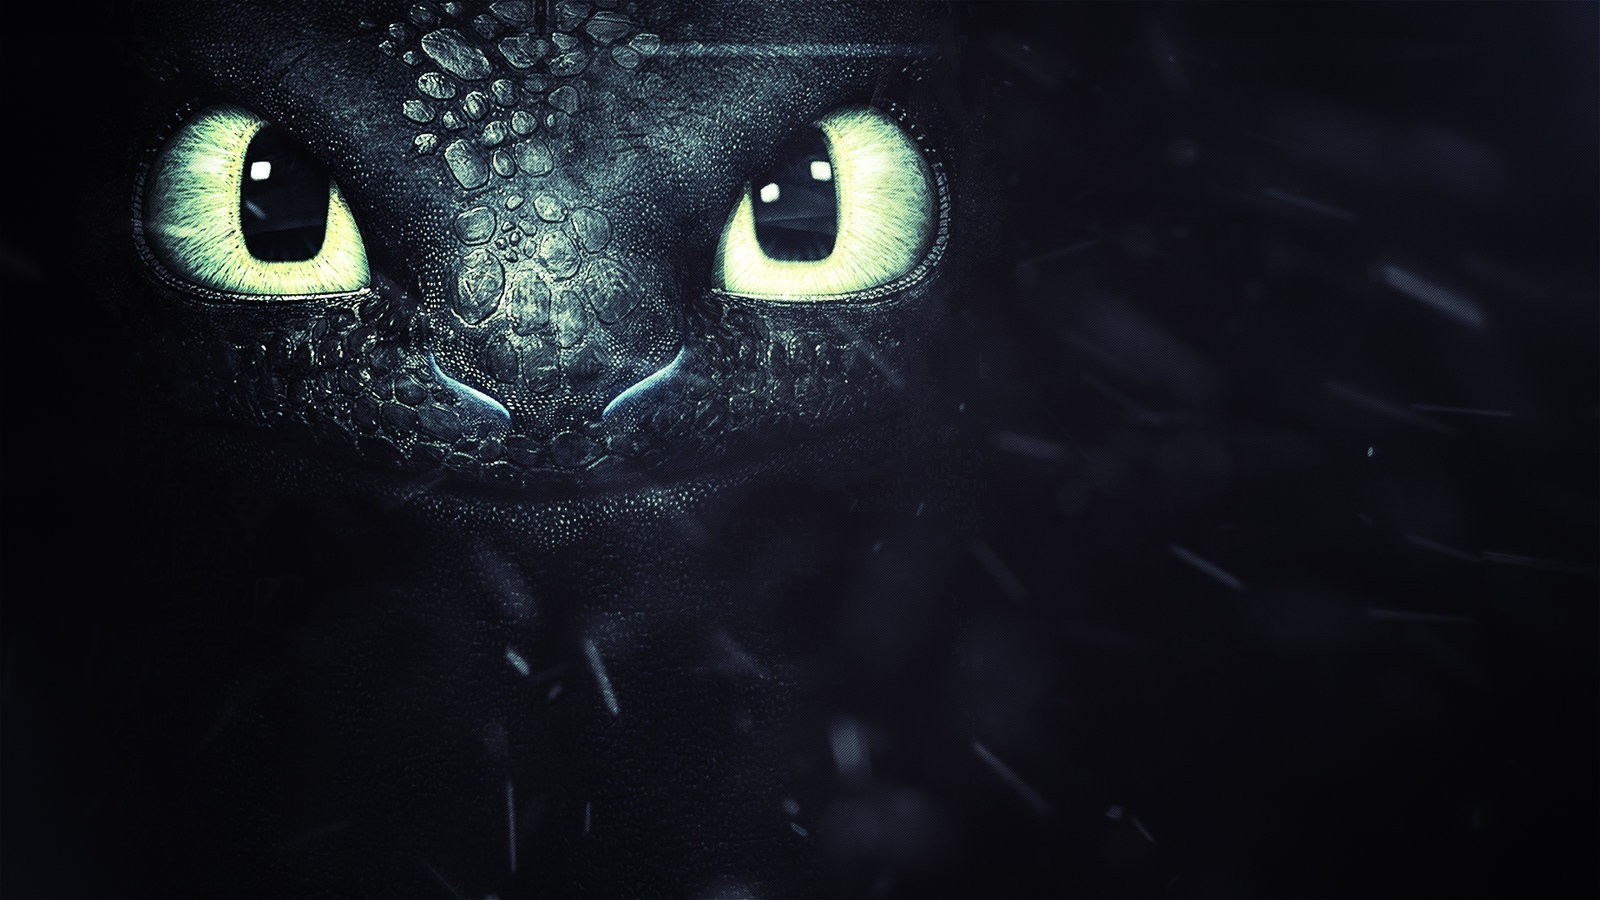 How To Train Your Dragon 2, Toothless, Movies Wallpaper